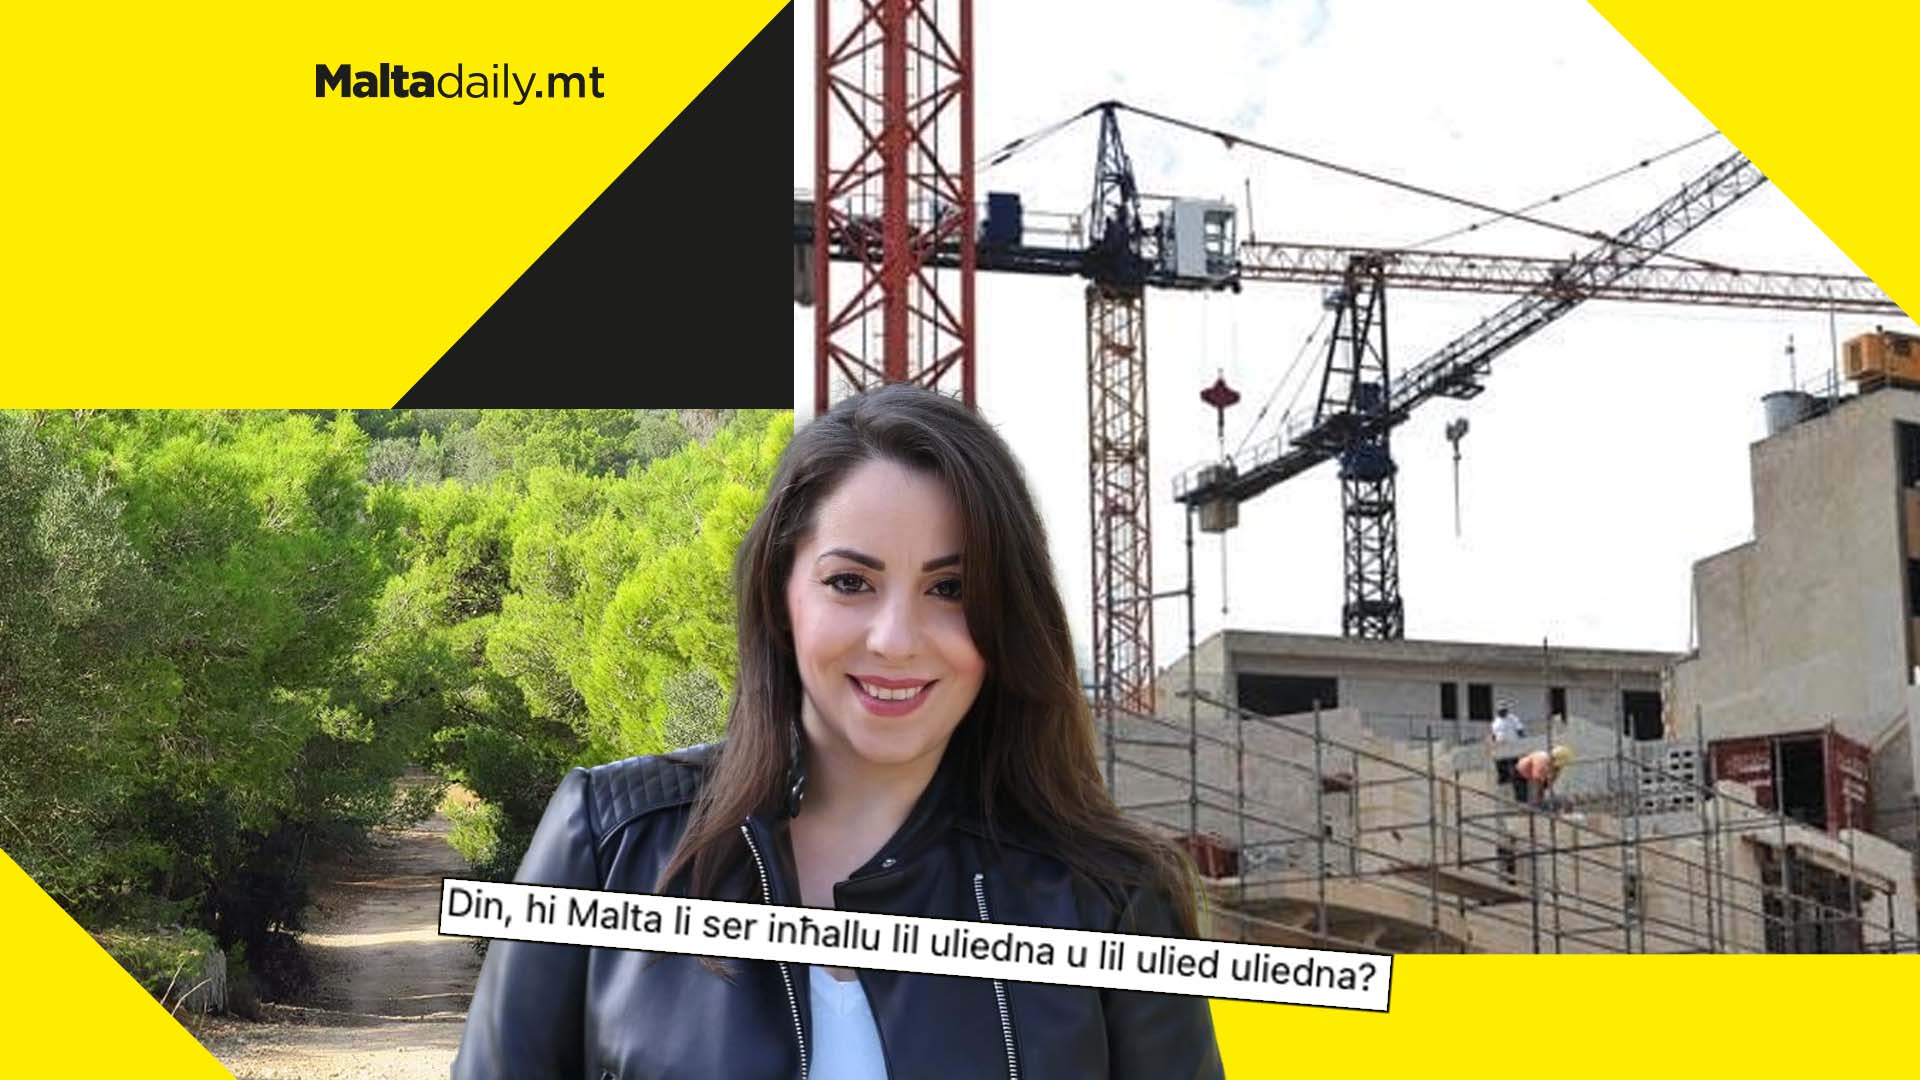 Why is my daughter counting cranes instead of trees asks MP Julie Zahra